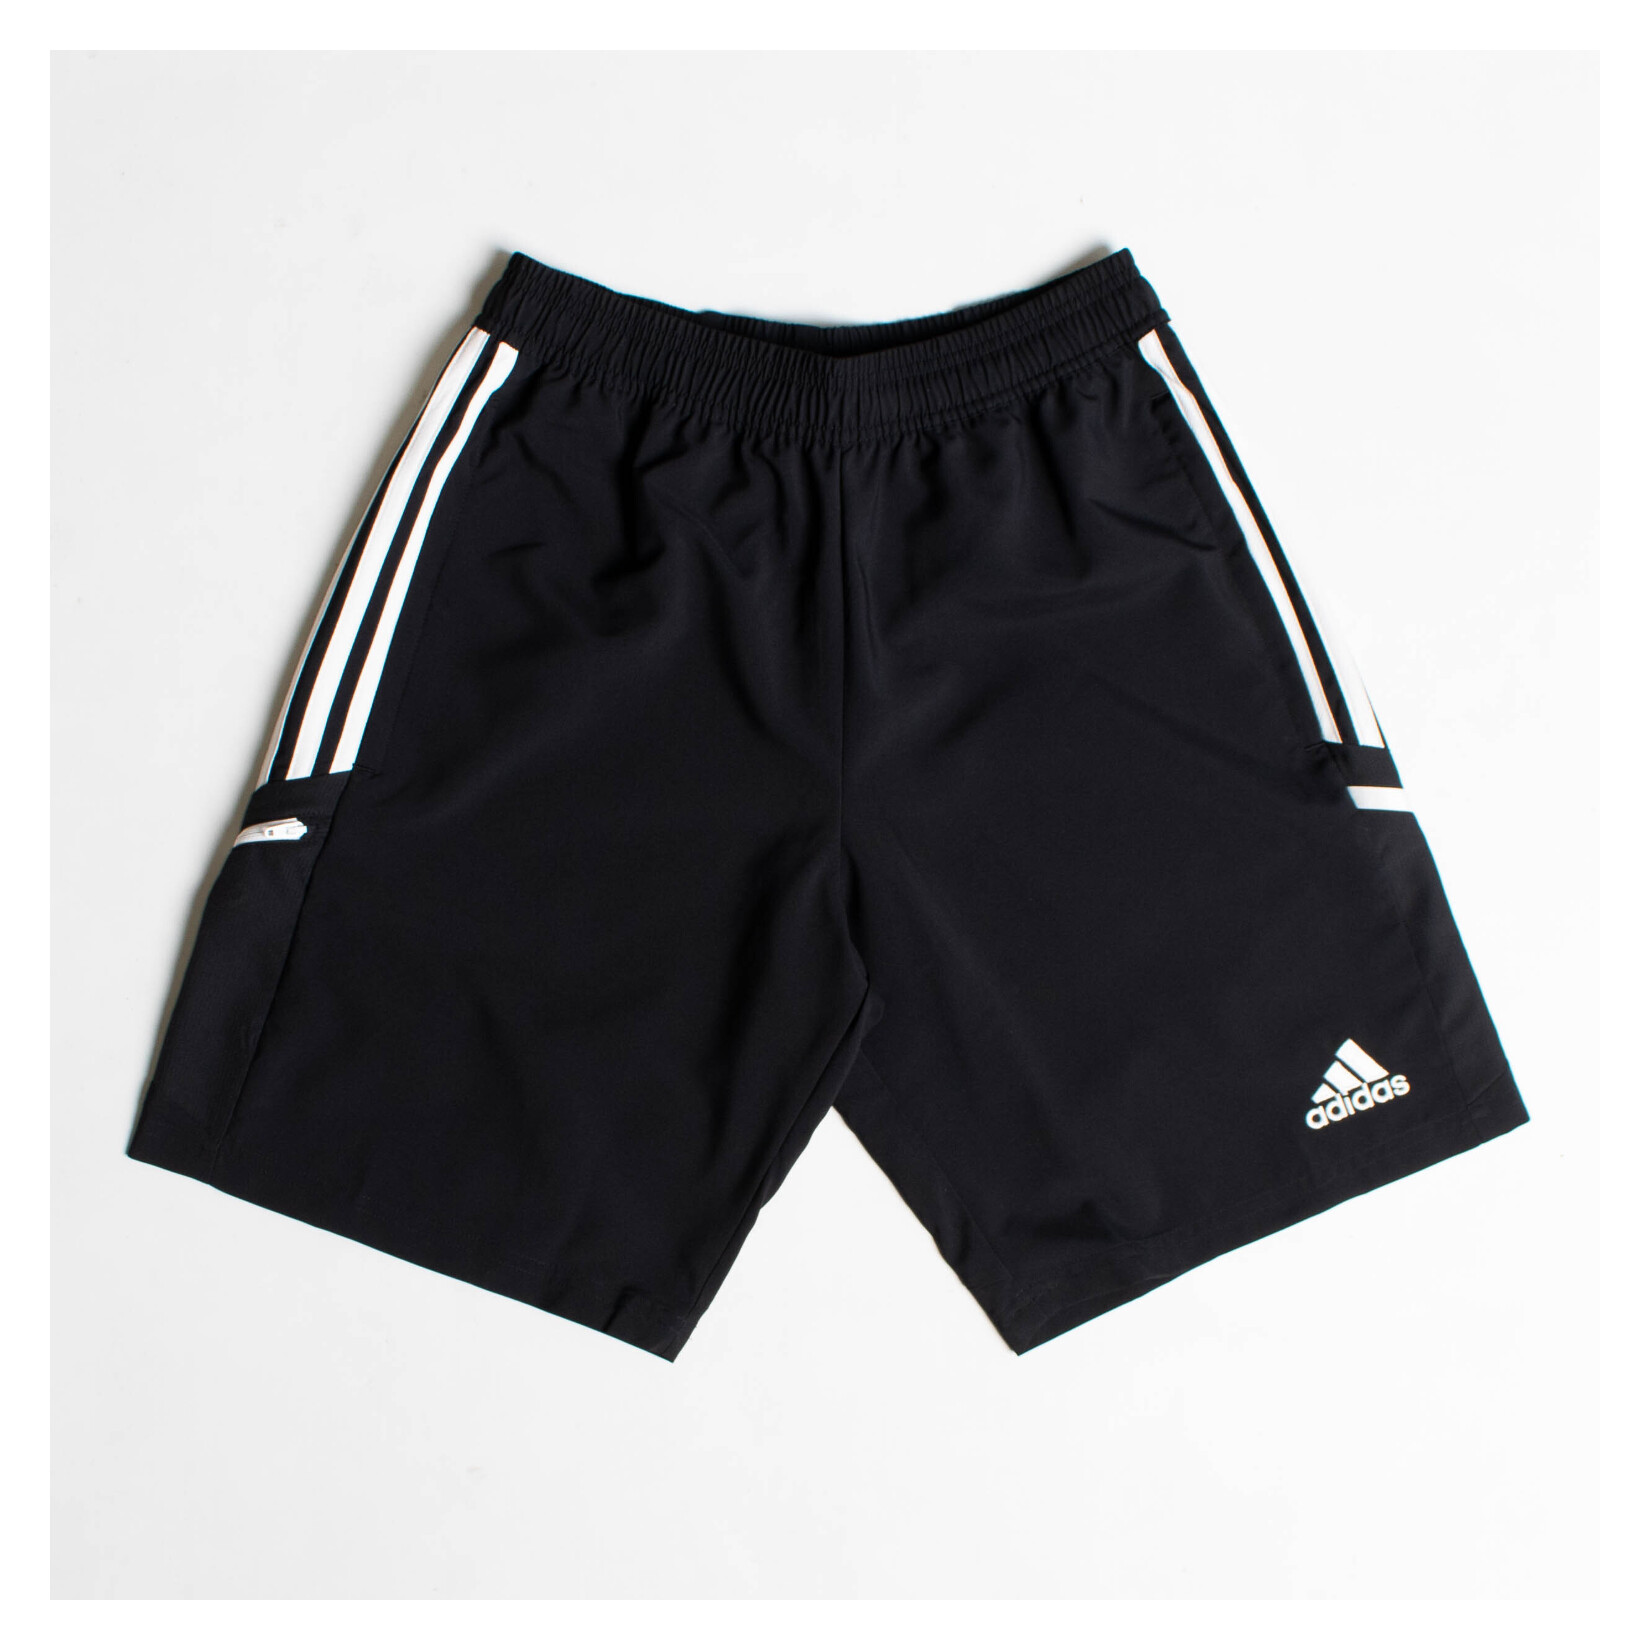 adidas Condivo 22 Downtime Shorts